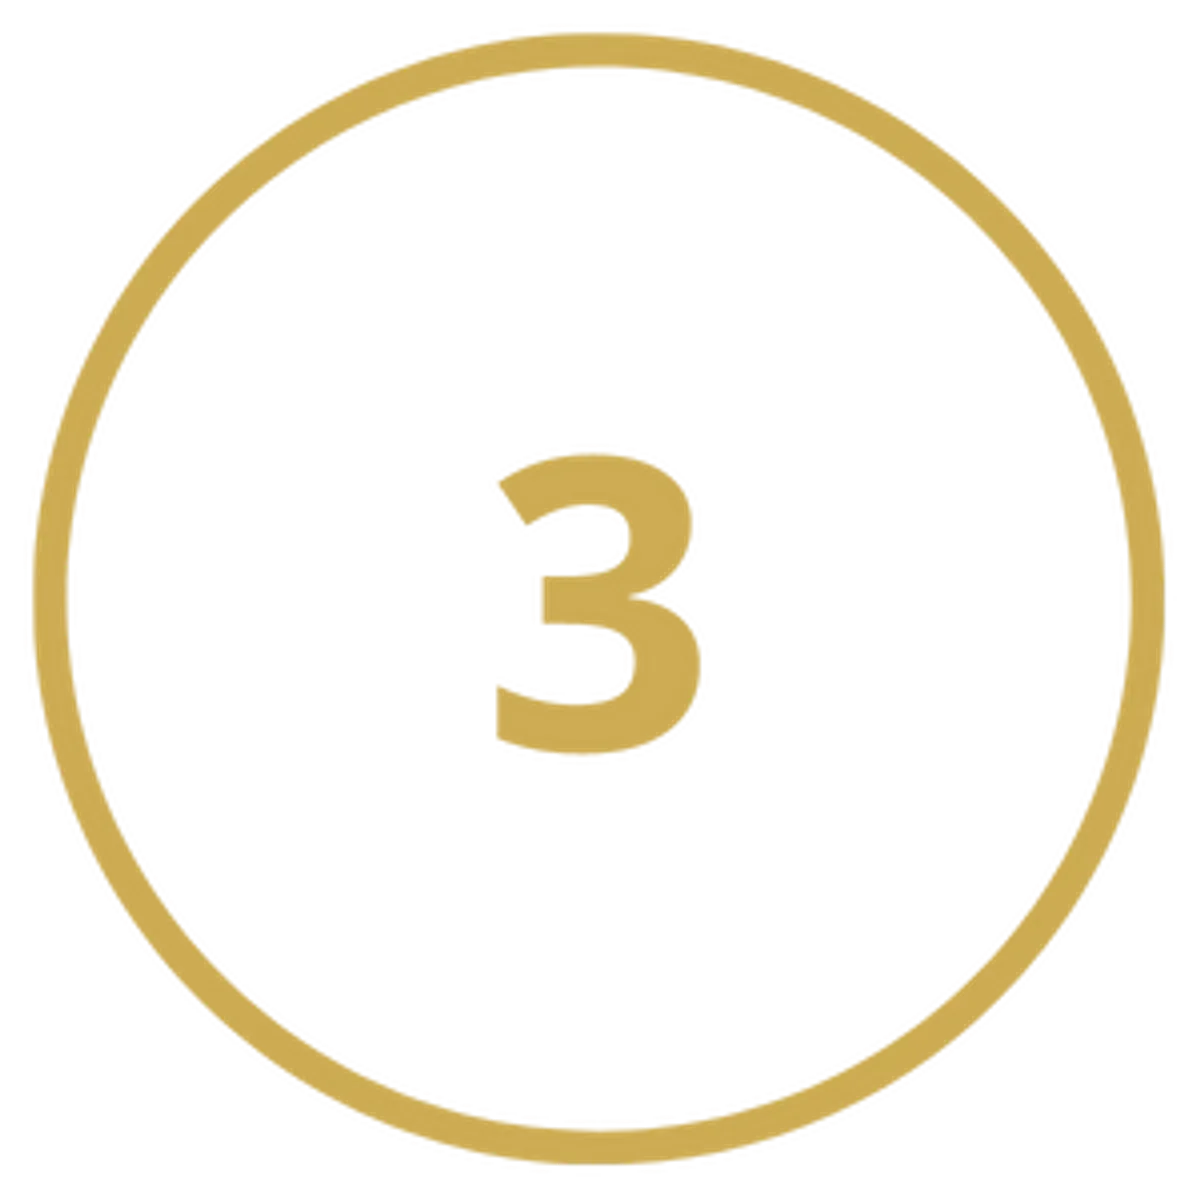 image of the number 3